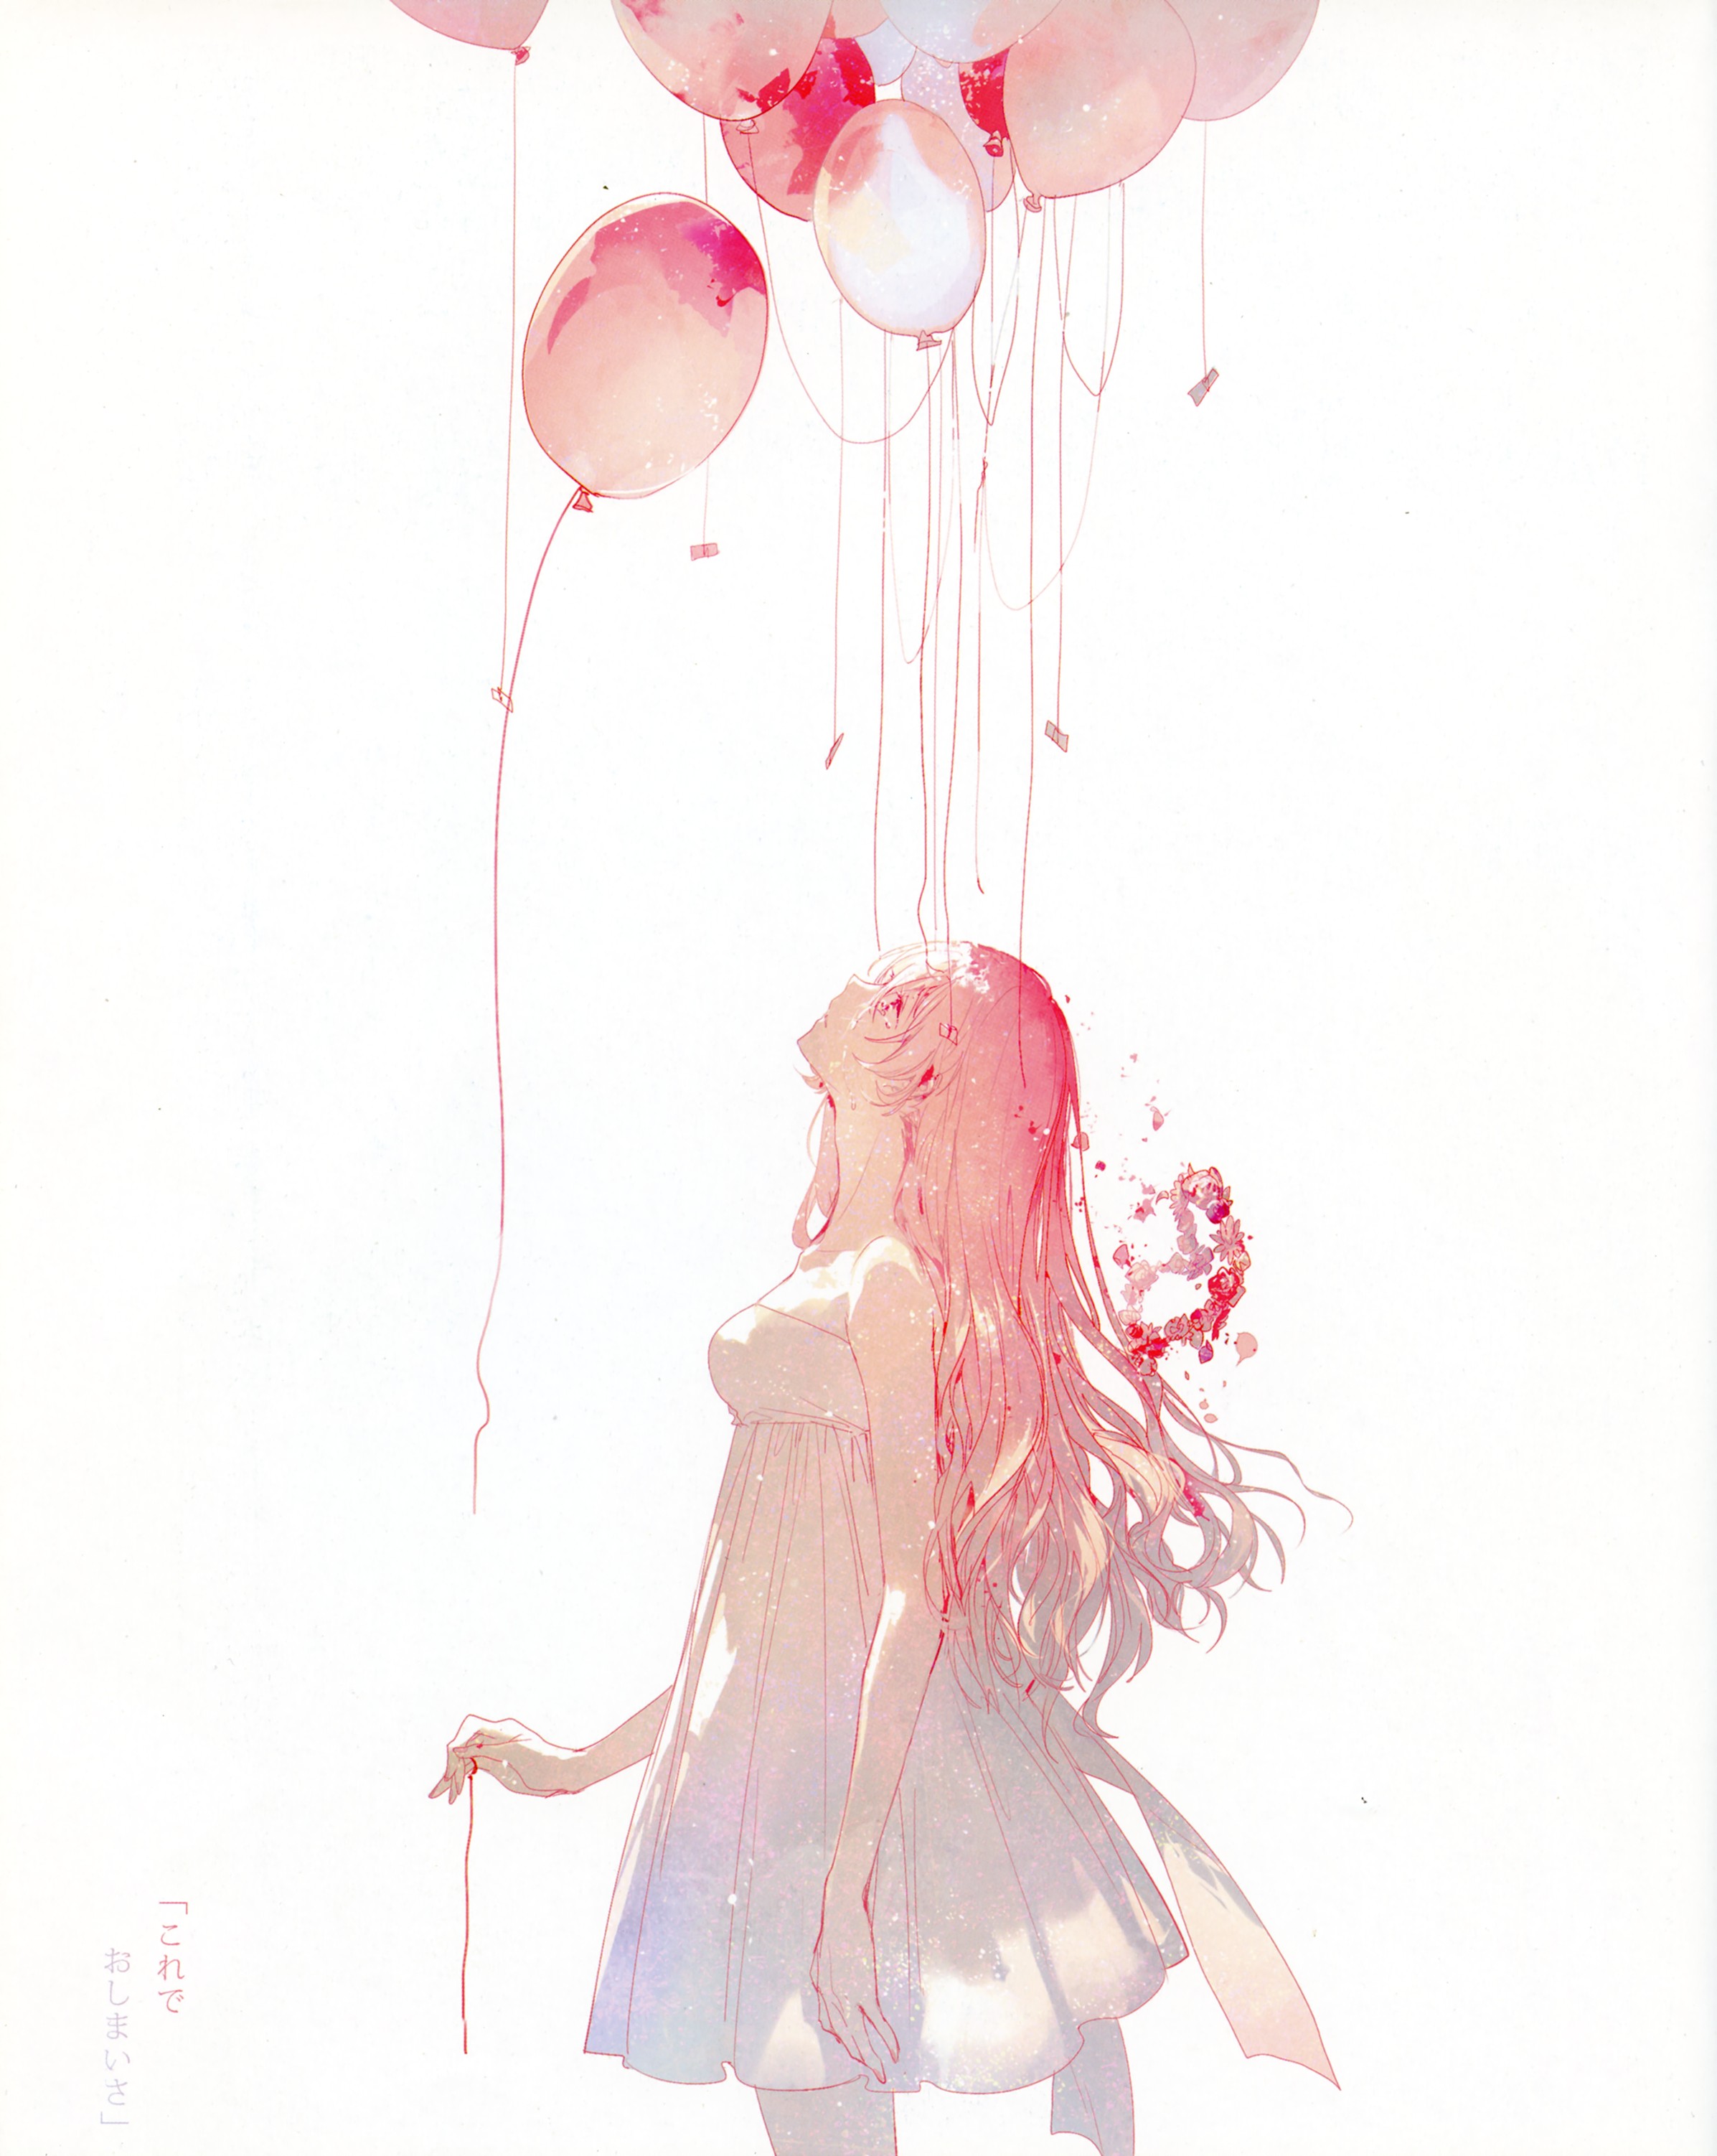 Anime 2393x3004 Vocaloid Megurine Luka long hair white dress balloon crying flowers anime girls anime looking up simple background white background